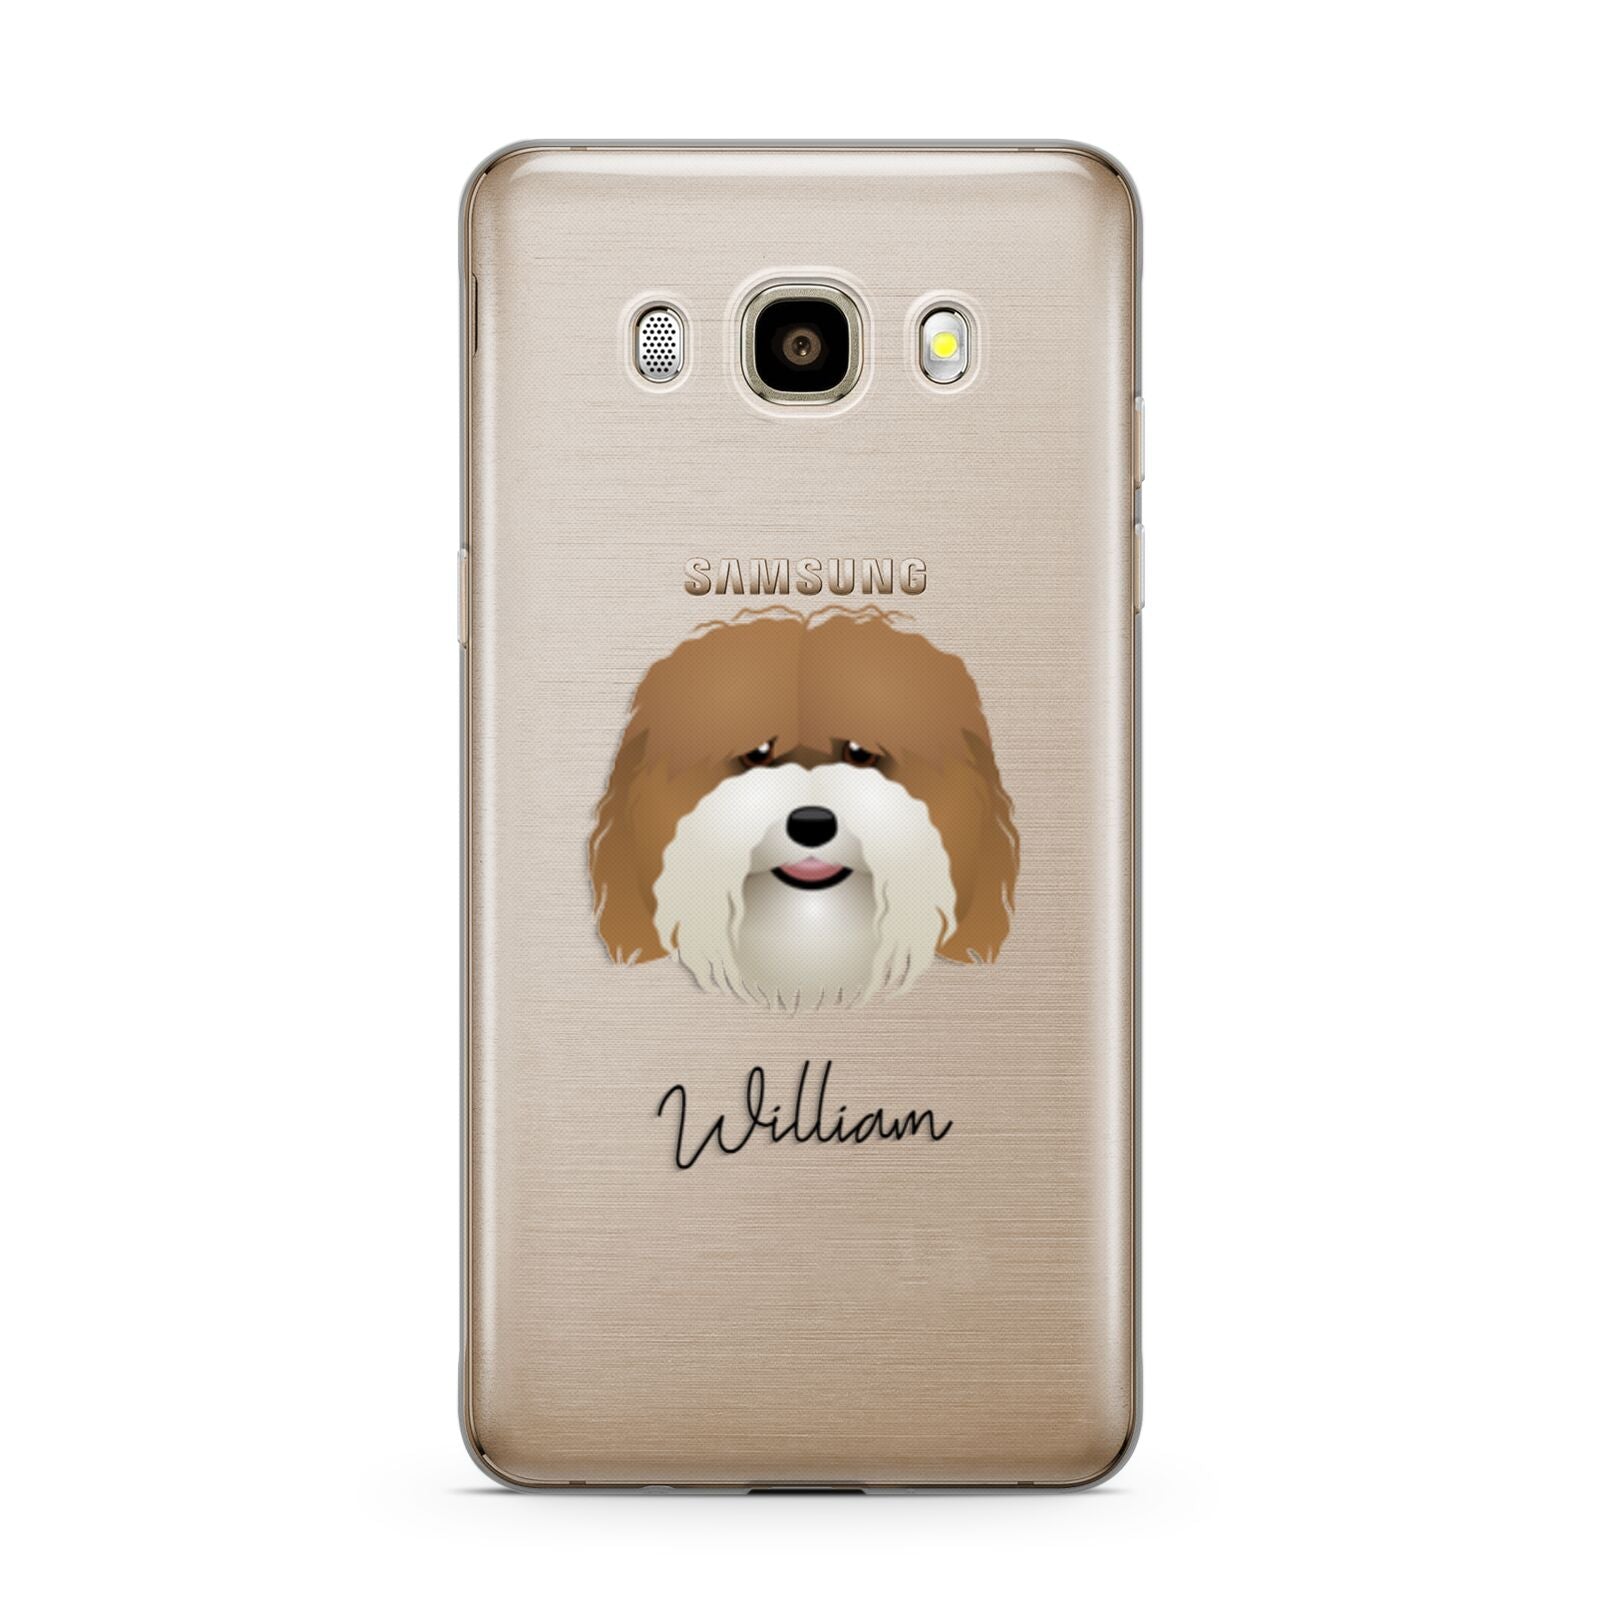 Coton De Tulear Personalised Samsung Galaxy J7 2016 Case on gold phone